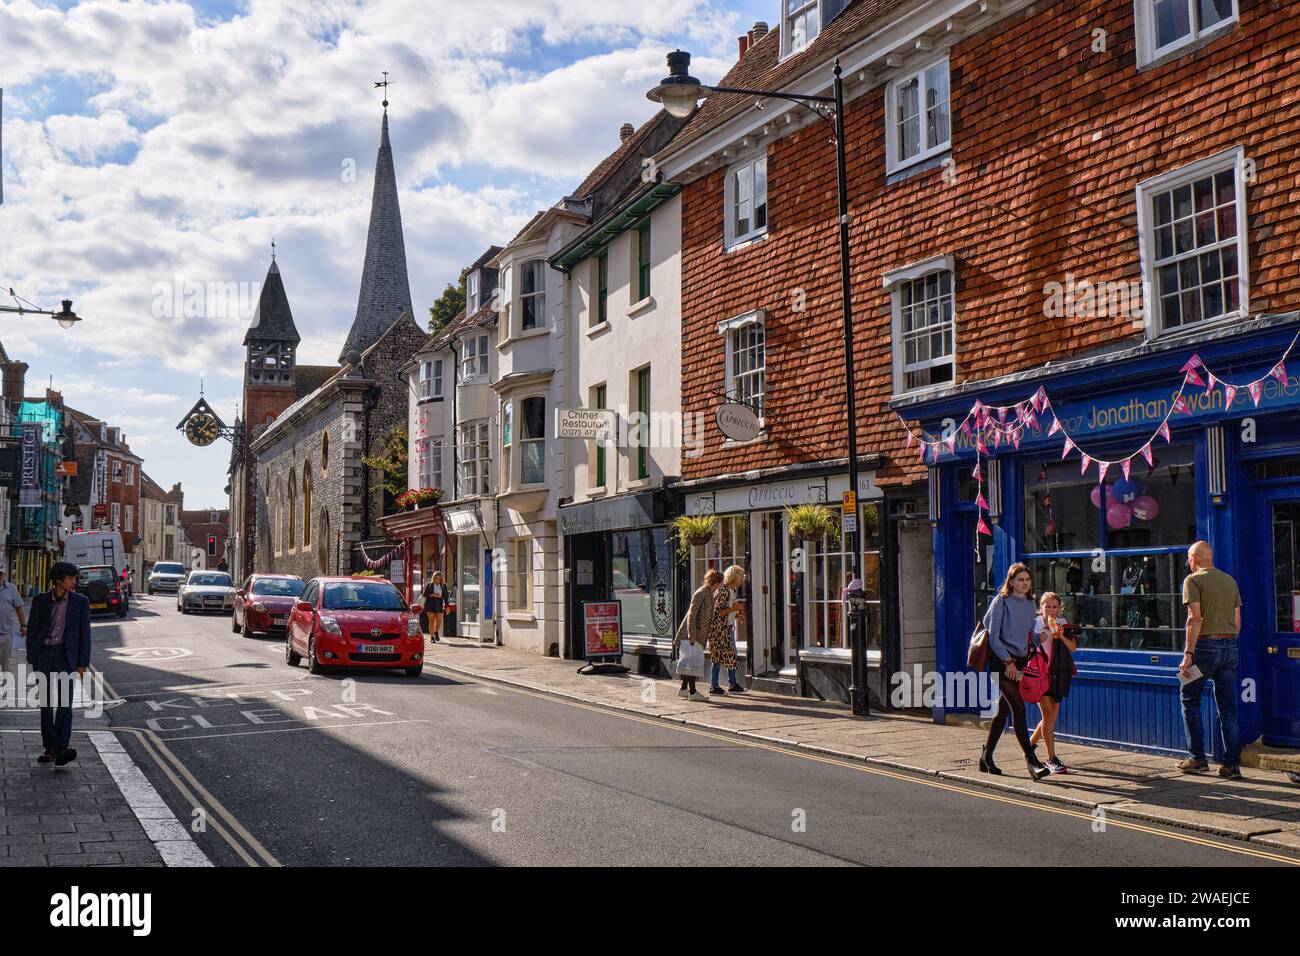 High Street, Lewes towards to city center, with shops and pedestrians. Lewes, UK, Stock Photo